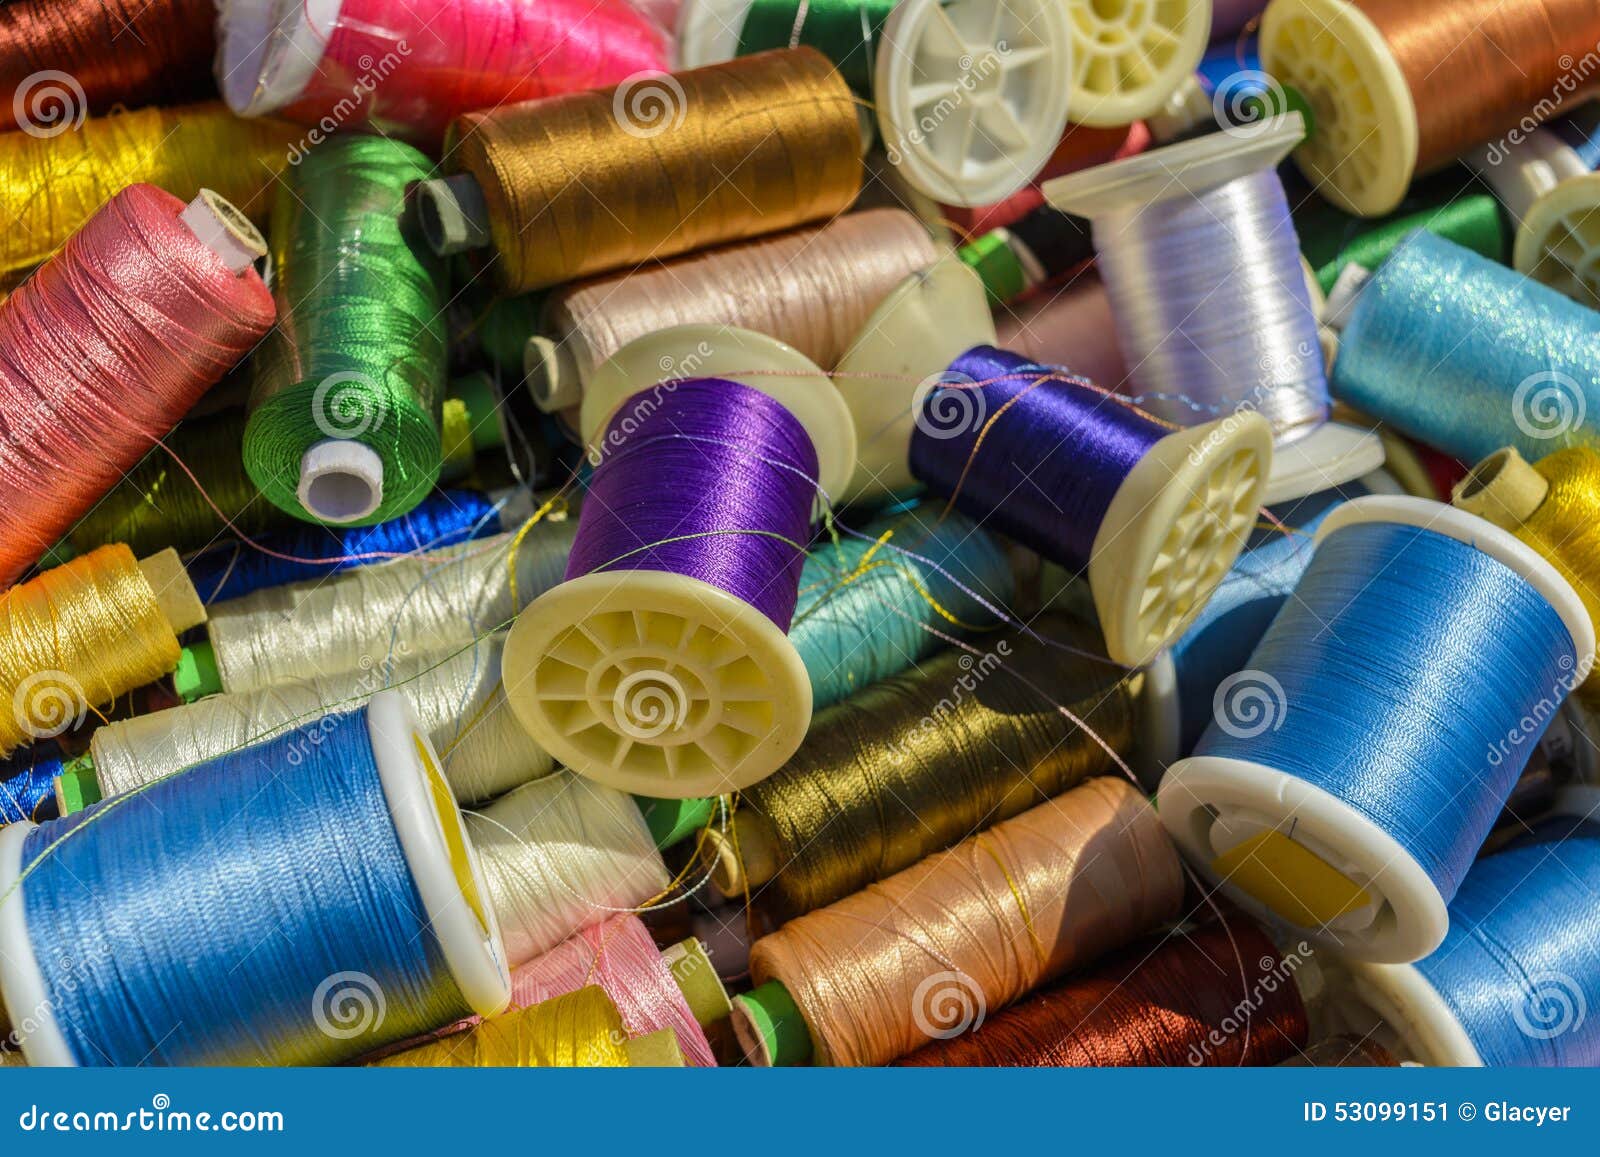 Spools of thread stock image. Image of fashion, industry - 53099151